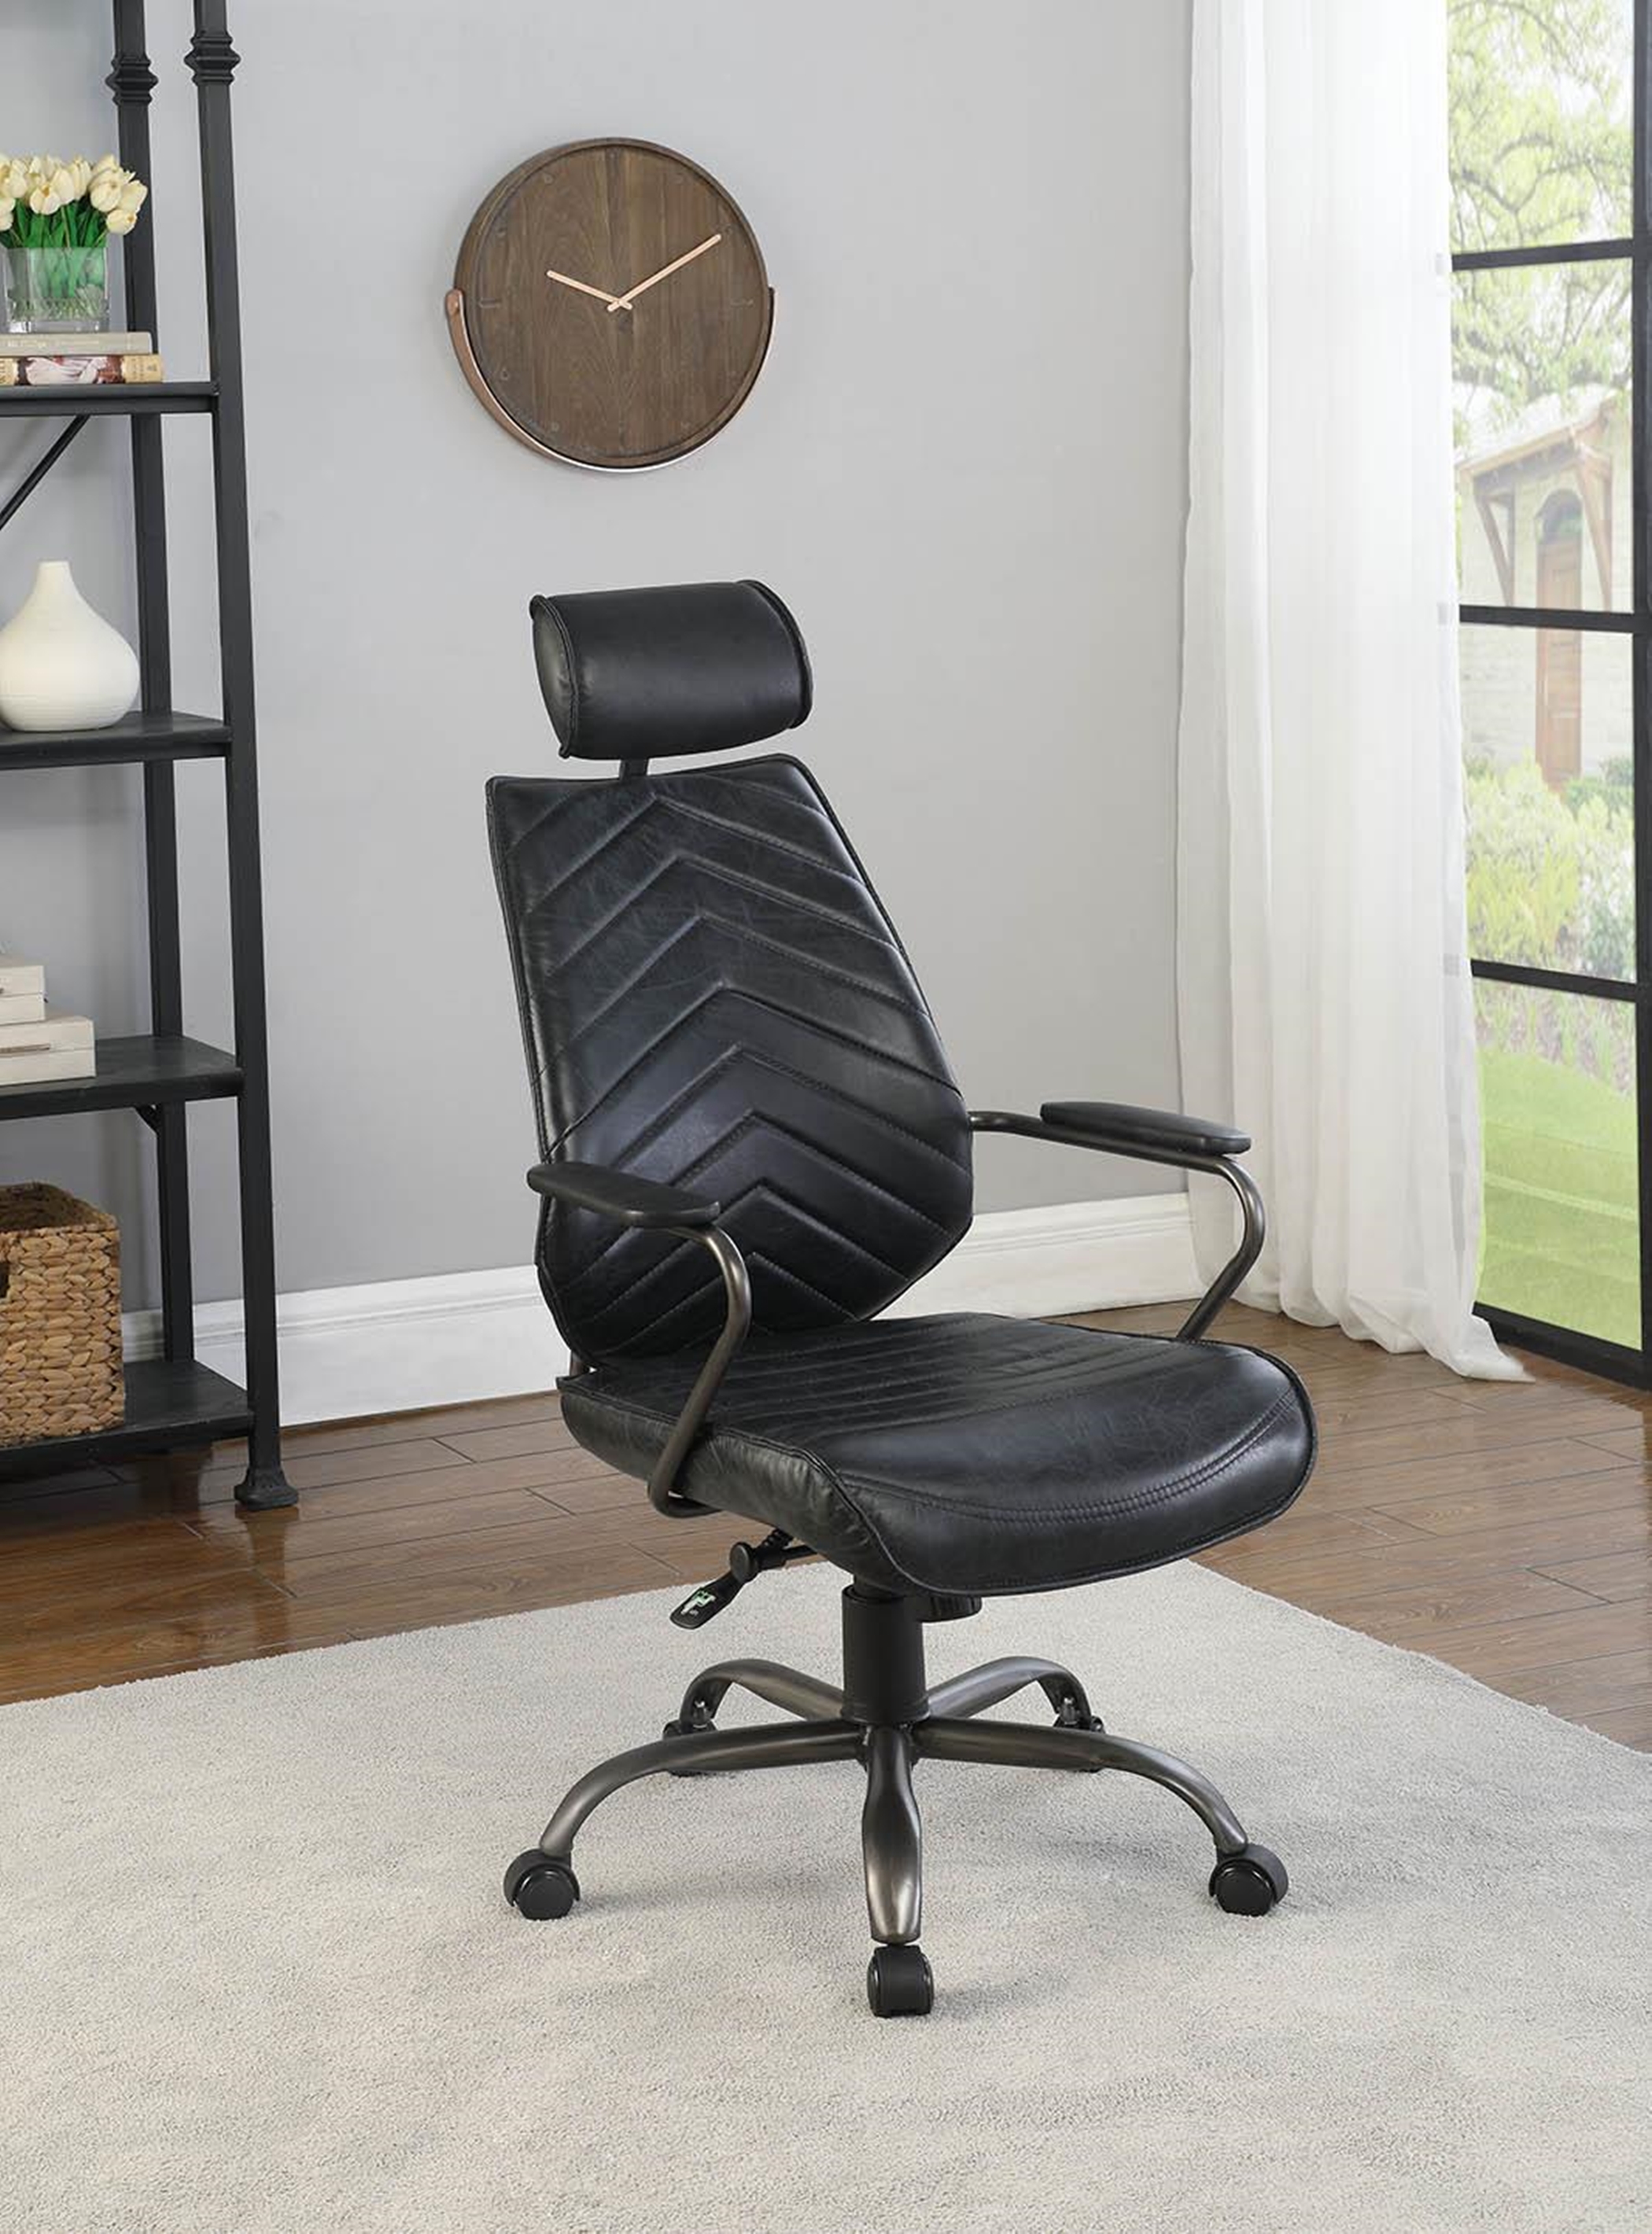 802181 High Back Office Chair